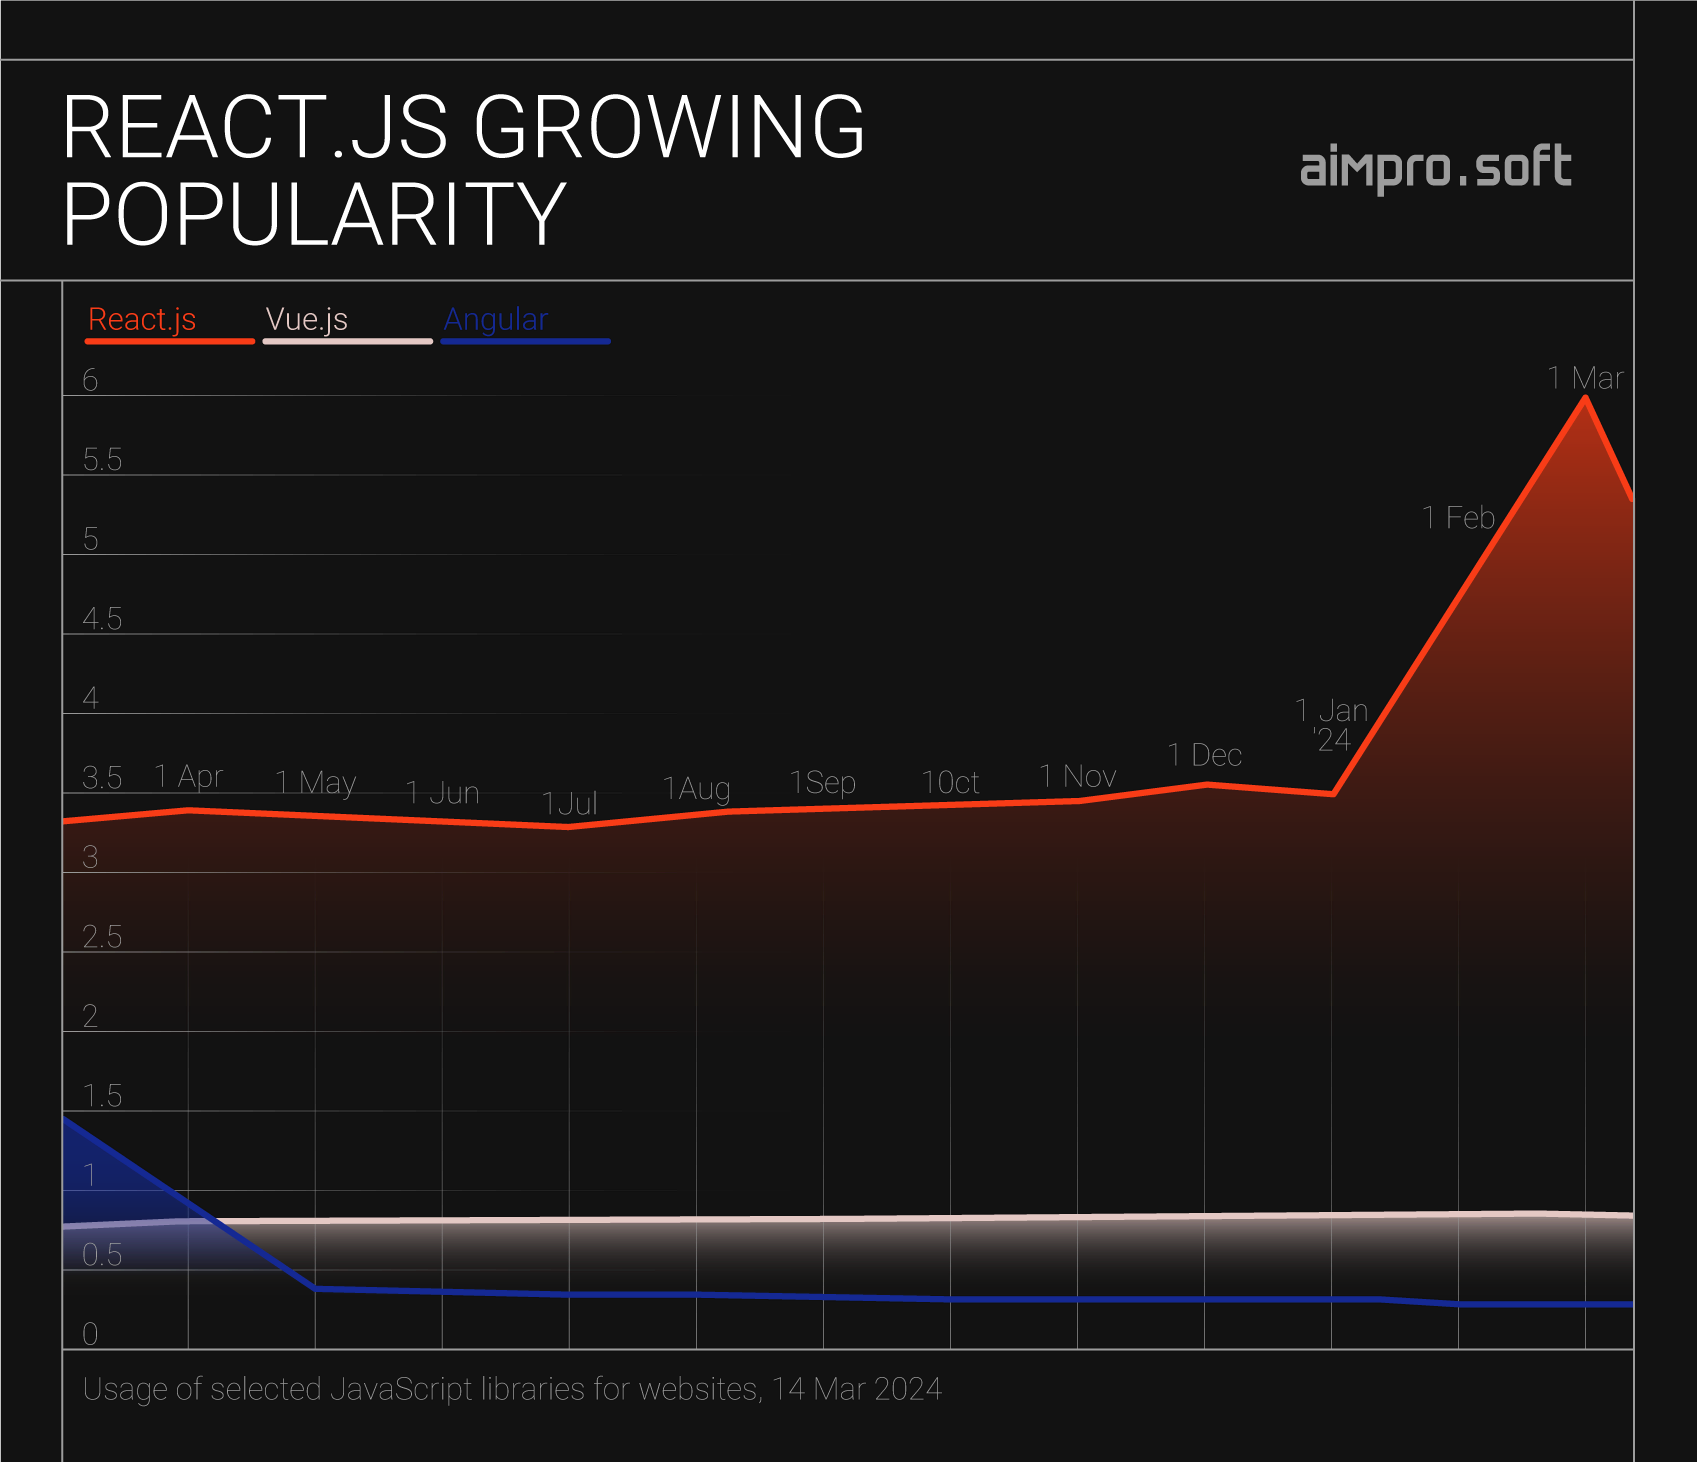 React is the most popular JavaScript library